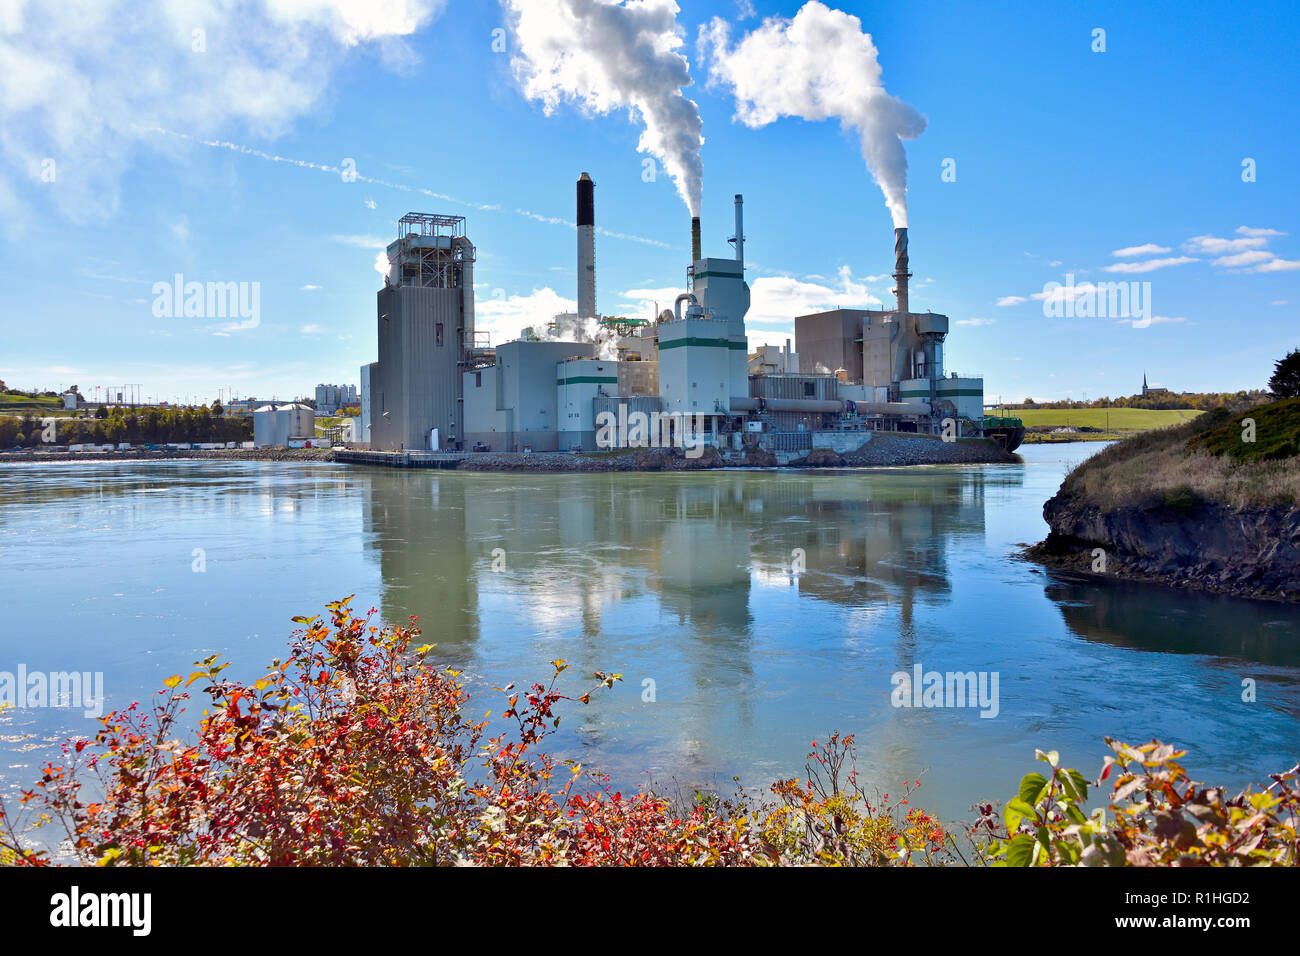 A horizontal image of the Irving pulp mill situated at the world famous Reversing Falls on the Saint John River in the city of Saint John New Brunswic Stock Photo